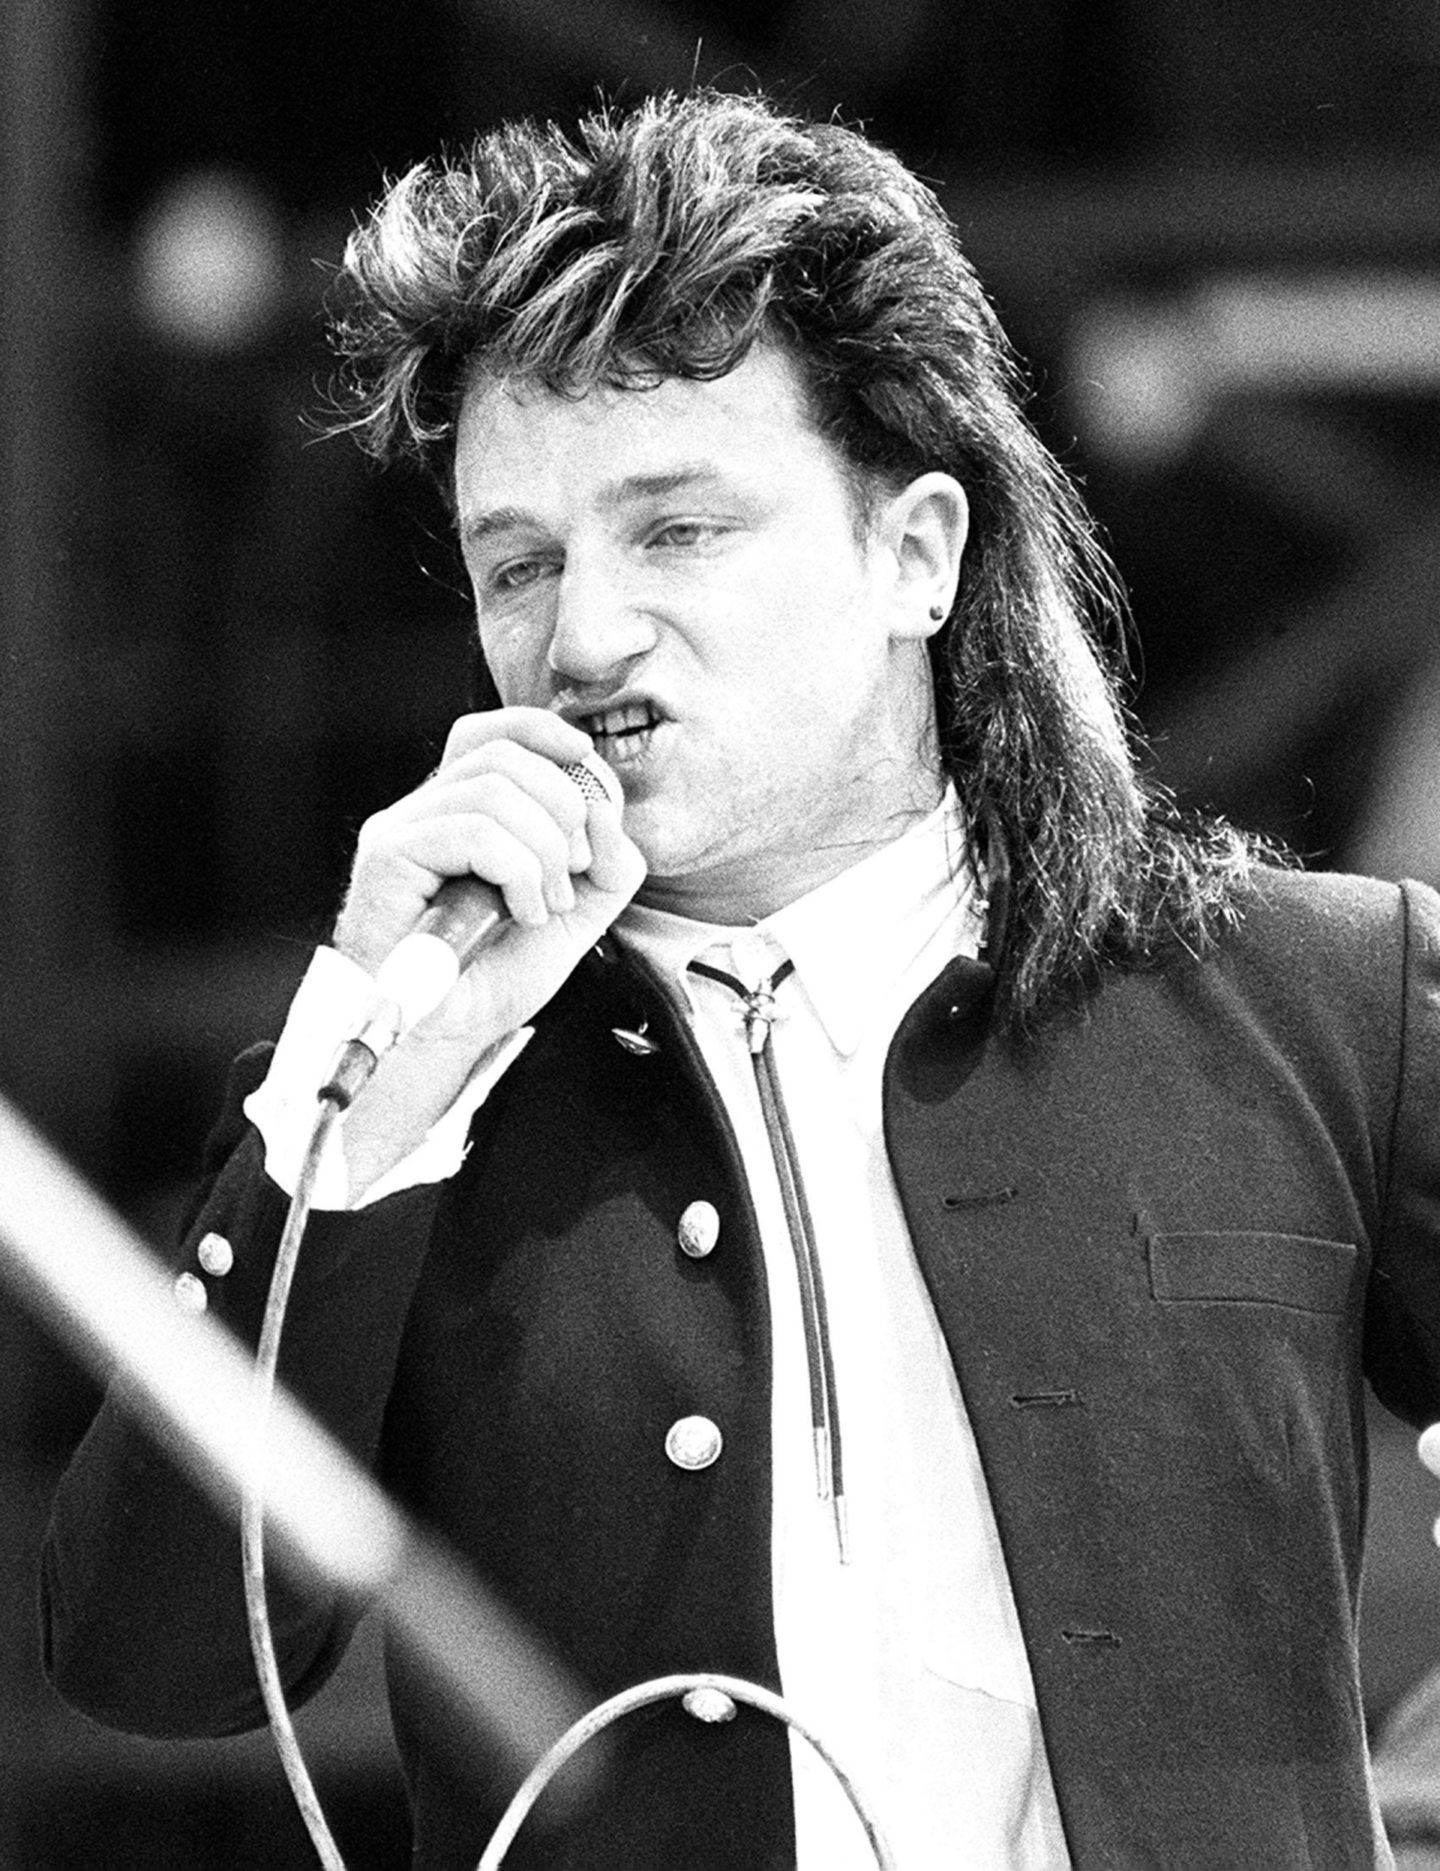 Bono sings as U2 perform at the Live Aid concert at WEmbley in July 1985